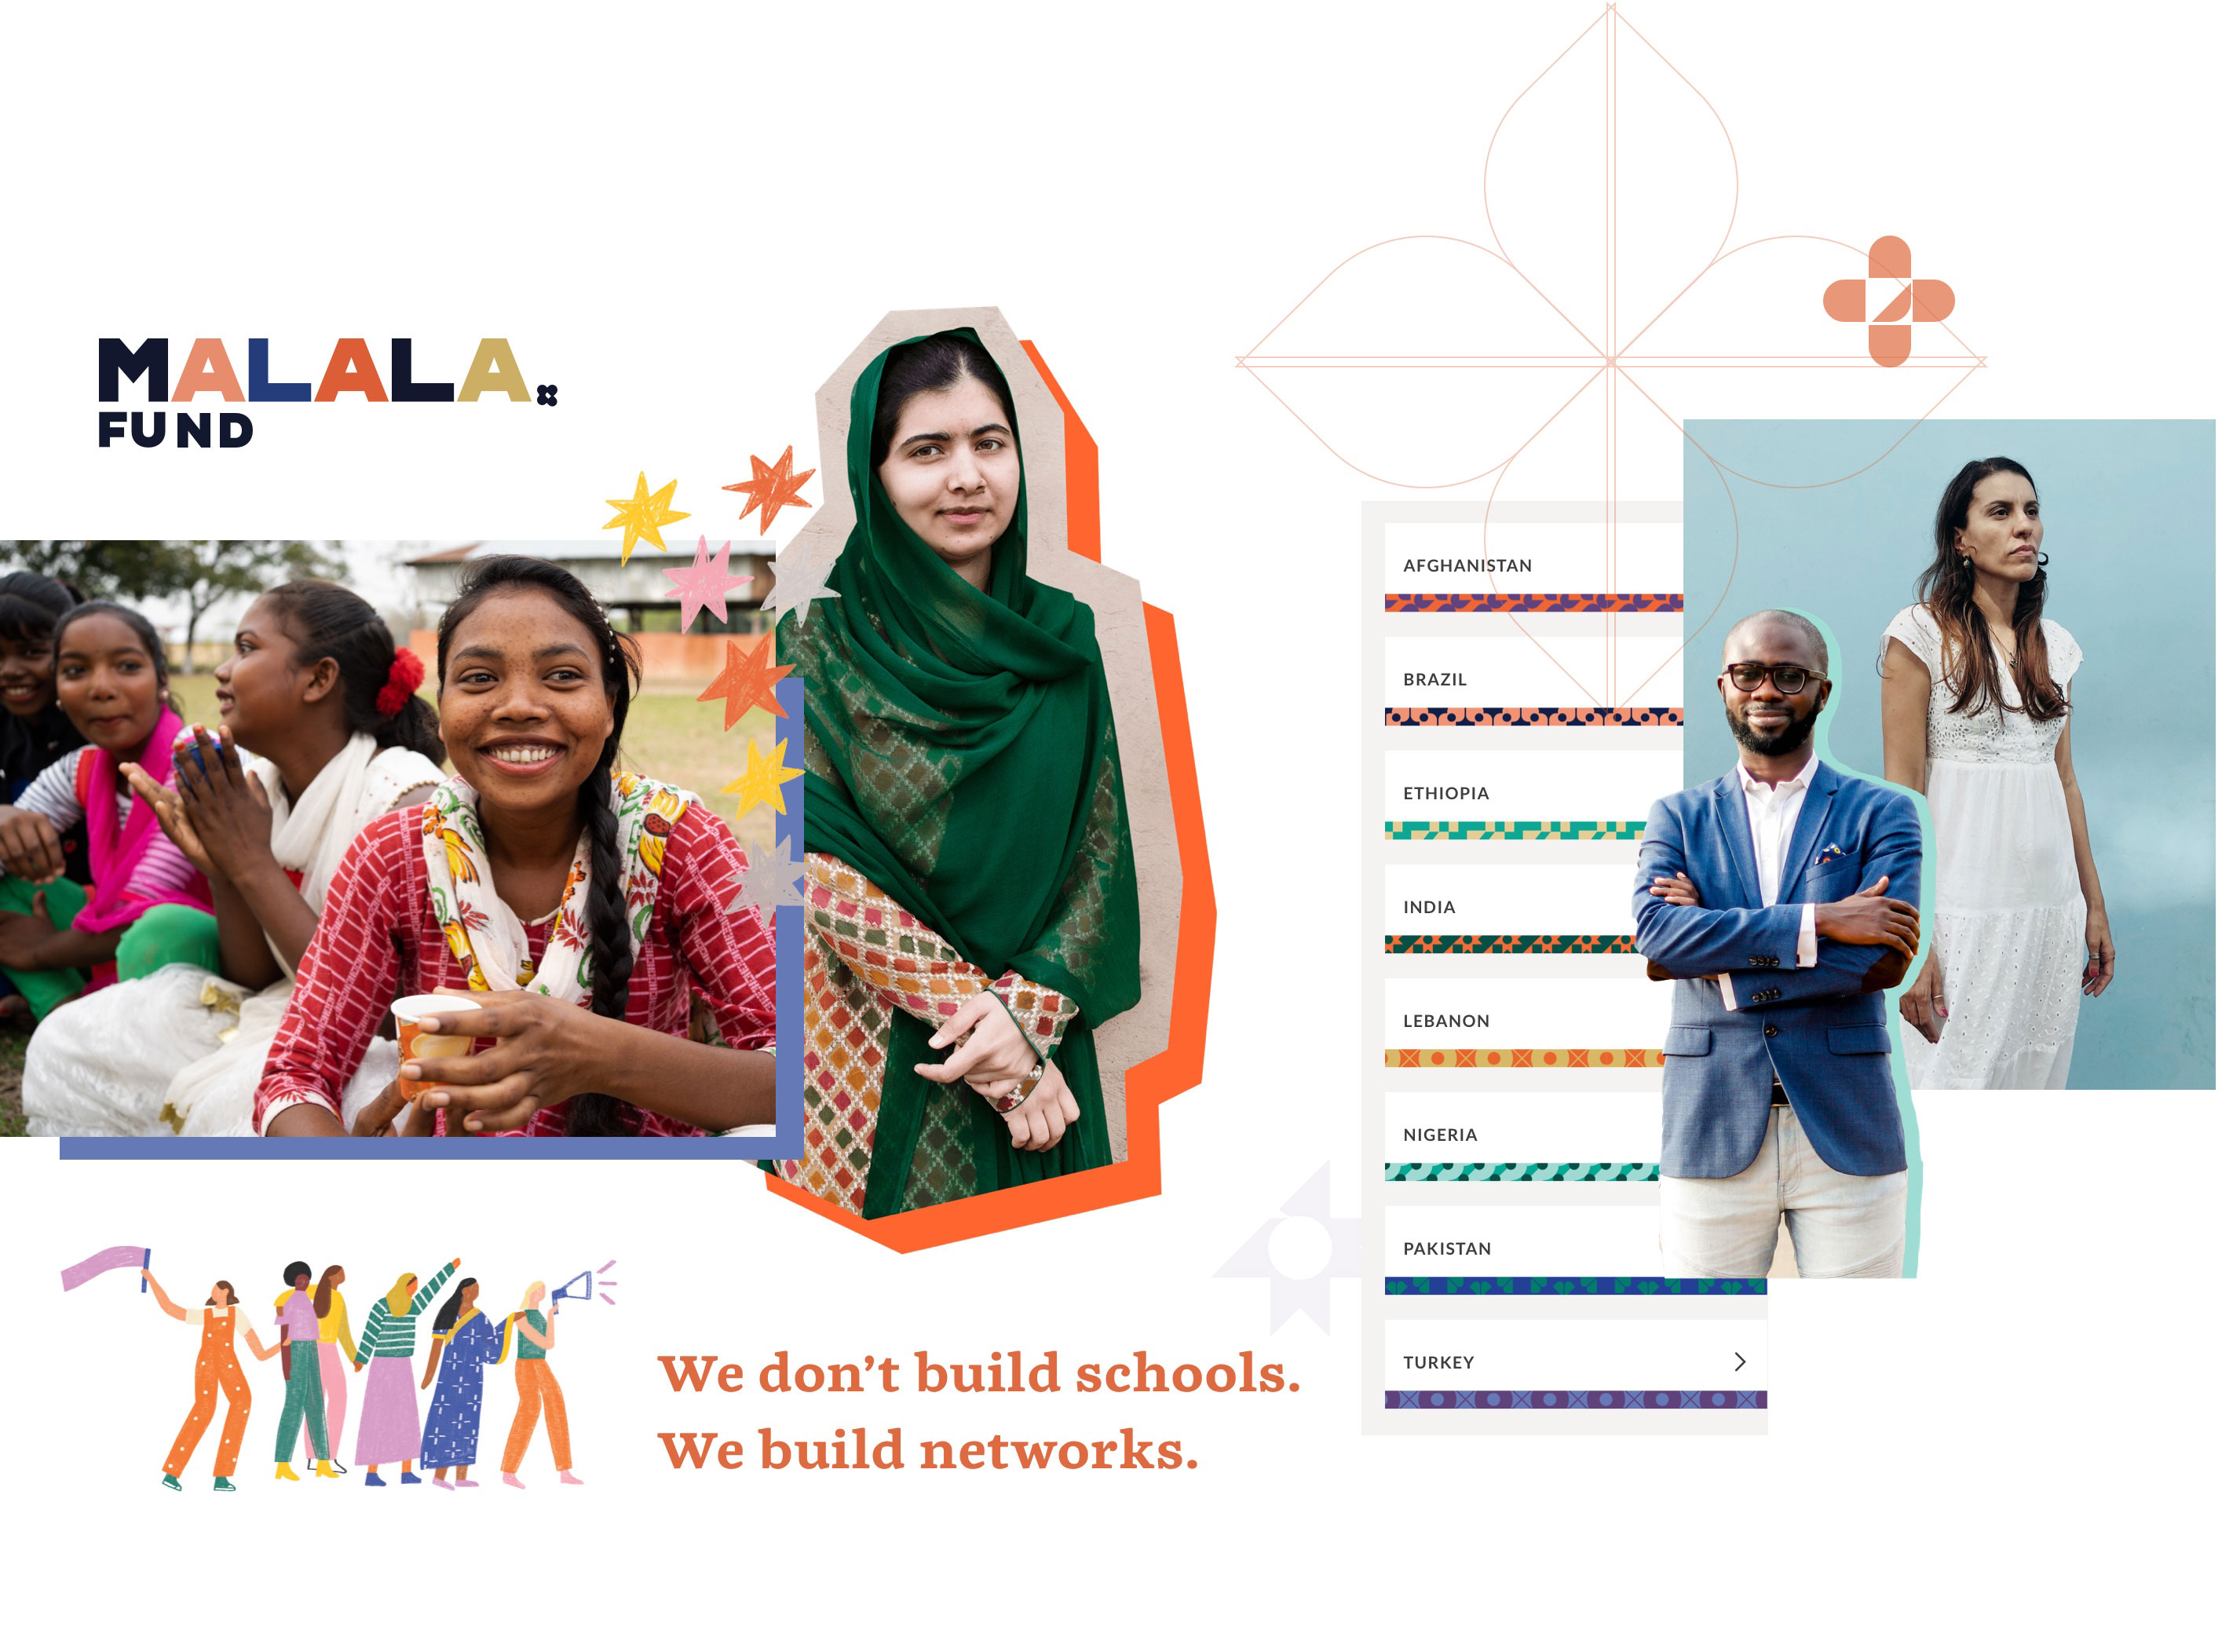 Collage of UI details from malala.org including Malala Fund logo, flower logos, country patterns, illustration of girls and Malala. Headline reads "We don't build schools. We build networks."